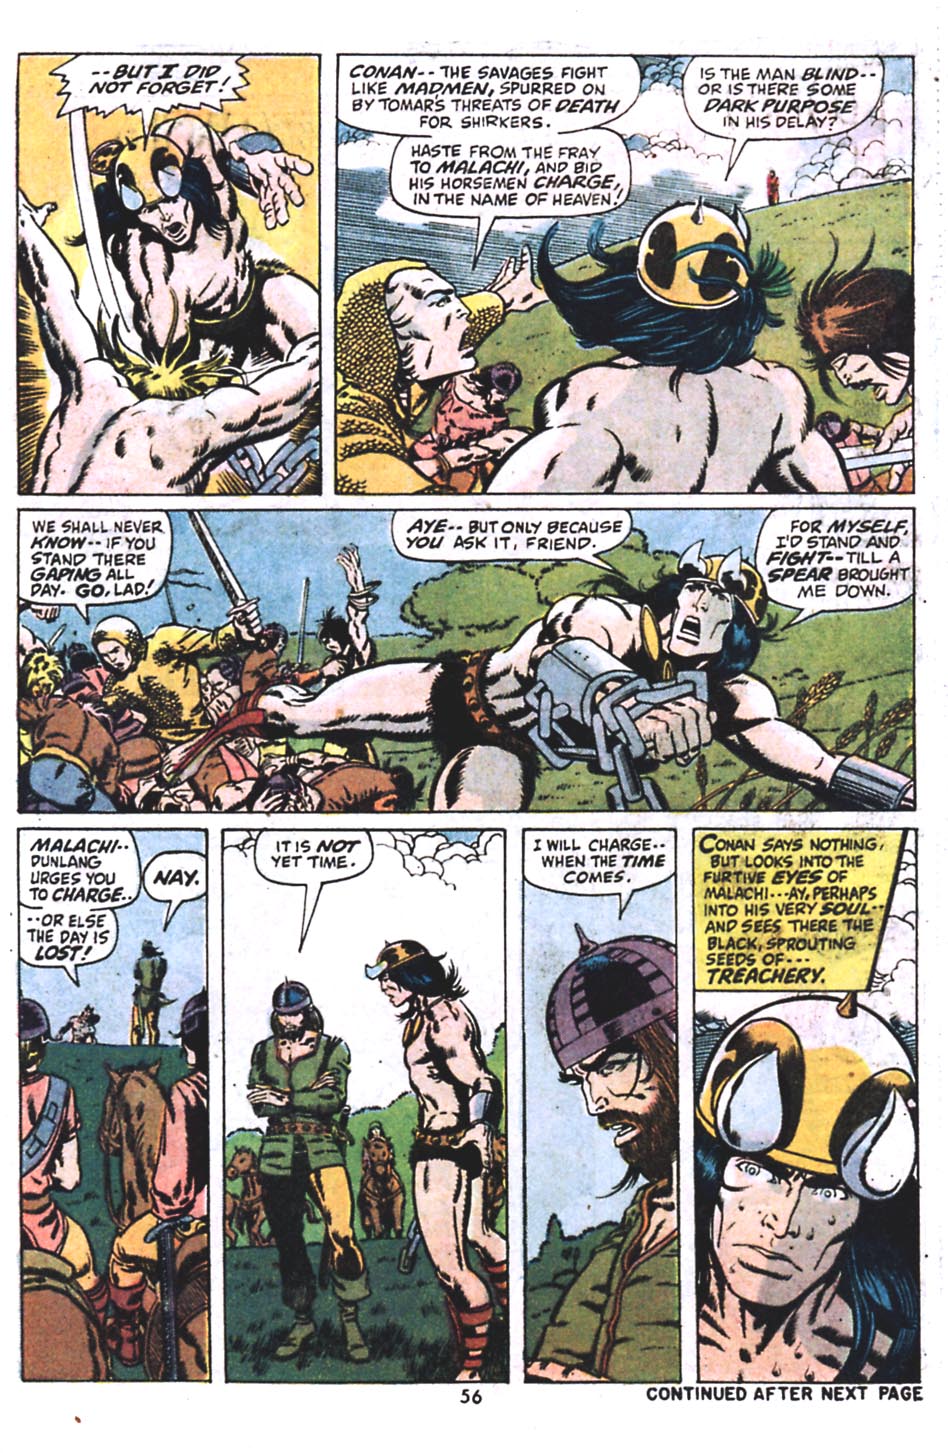 Read online Giant-Size Conan comic -  Issue #1 - 46